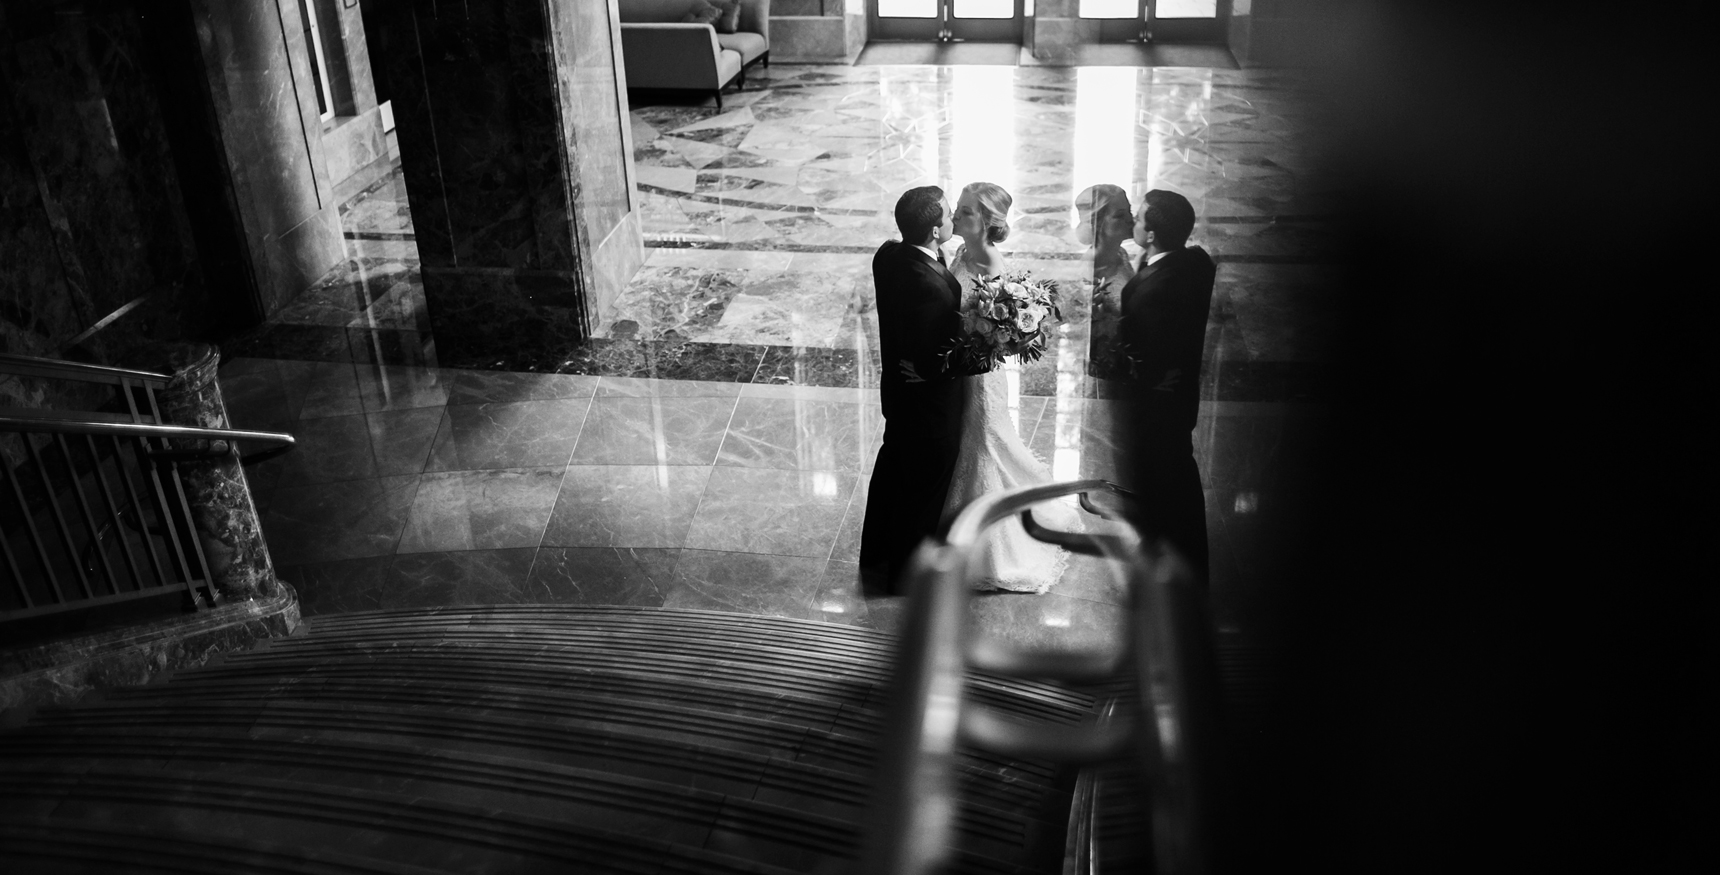 Bride and groom reflection